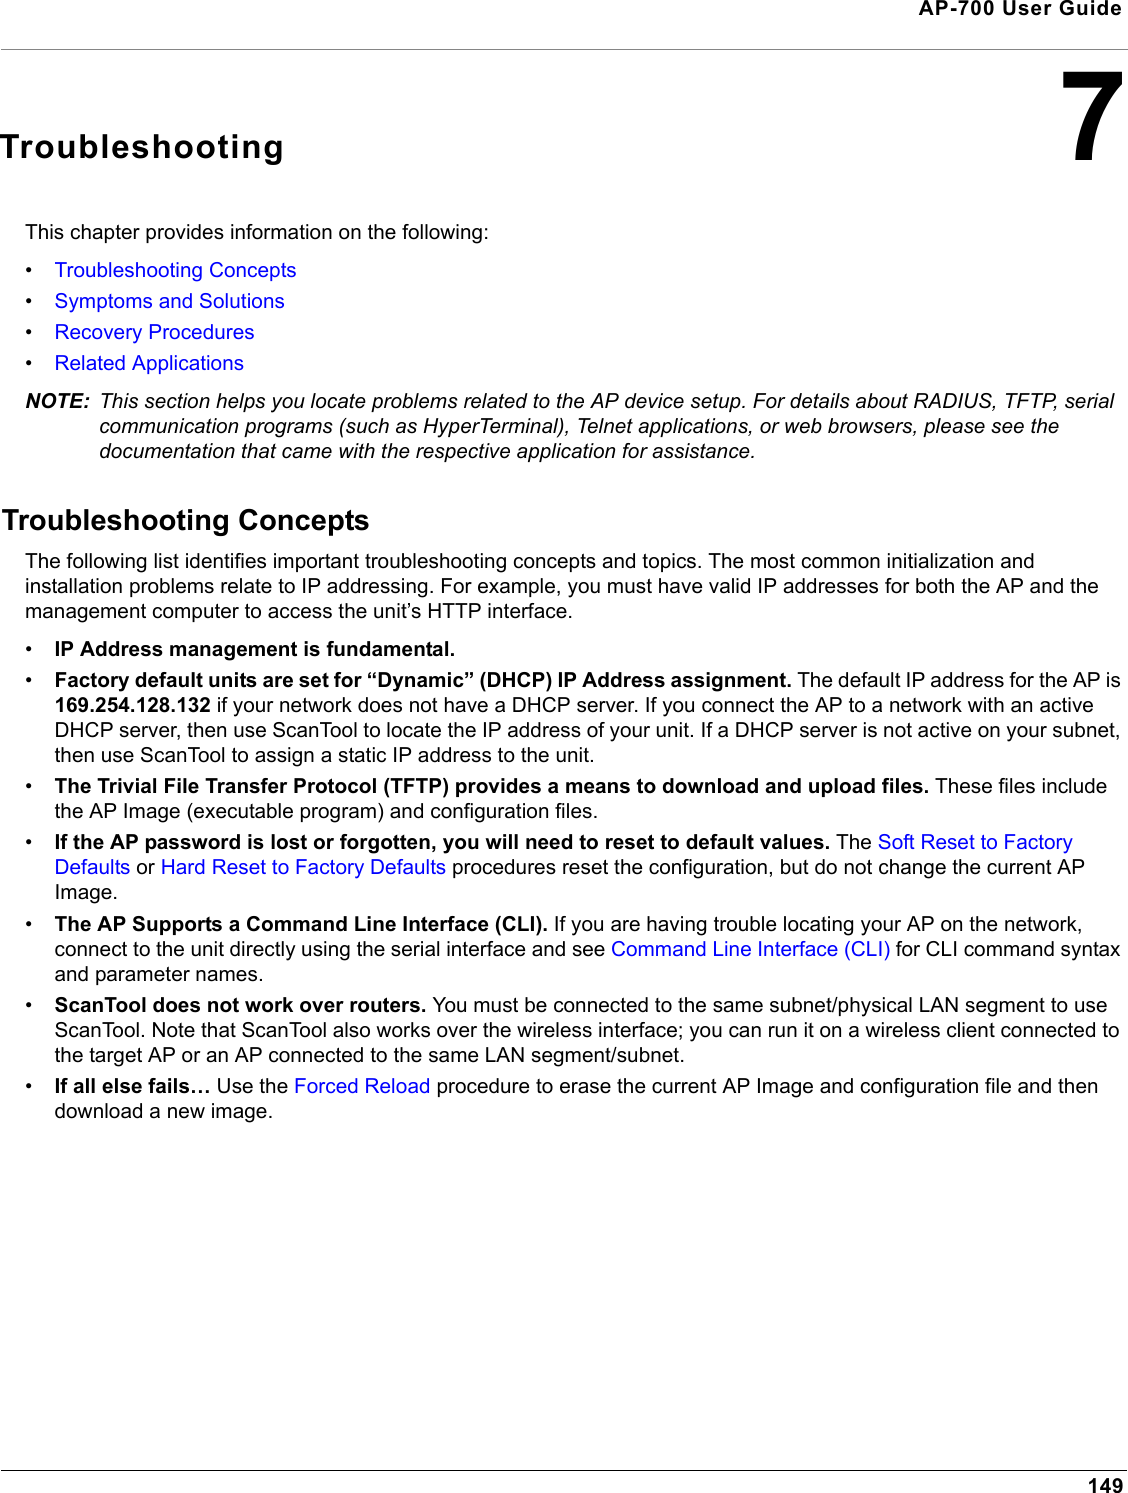 149AP-700 User Guide7TroubleshootingThis chapter provides information on the following:•Troubleshooting Concepts•Symptoms and Solutions•Recovery Procedures•Related ApplicationsNOTE: This section helps you locate problems related to the AP device setup. For details about RADIUS, TFTP, serial communication programs (such as HyperTerminal), Telnet applications, or web browsers, please see the documentation that came with the respective application for assistance. Troubleshooting ConceptsThe following list identifies important troubleshooting concepts and topics. The most common initialization and installation problems relate to IP addressing. For example, you must have valid IP addresses for both the AP and the management computer to access the unit’s HTTP interface.•IP Address management is fundamental. •Factory default units are set for “Dynamic” (DHCP) IP Address assignment. The default IP address for the AP is 169.254.128.132 if your network does not have a DHCP server. If you connect the AP to a network with an active DHCP server, then use ScanTool to locate the IP address of your unit. If a DHCP server is not active on your subnet, then use ScanTool to assign a static IP address to the unit.•The Trivial File Transfer Protocol (TFTP) provides a means to download and upload files. These files include the AP Image (executable program) and configuration files. •If the AP password is lost or forgotten, you will need to reset to default values. The Soft Reset to Factory Defaults or Hard Reset to Factory Defaults procedures reset the configuration, but do not change the current AP Image. •The AP Supports a Command Line Interface (CLI). If you are having trouble locating your AP on the network, connect to the unit directly using the serial interface and see Command Line Interface (CLI) for CLI command syntax and parameter names.•ScanTool does not work over routers. You must be connected to the same subnet/physical LAN segment to use ScanTool. Note that ScanTool also works over the wireless interface; you can run it on a wireless client connected to the target AP or an AP connected to the same LAN segment/subnet.•If all else fails… Use the Forced Reload procedure to erase the current AP Image and configuration file and then download a new image.